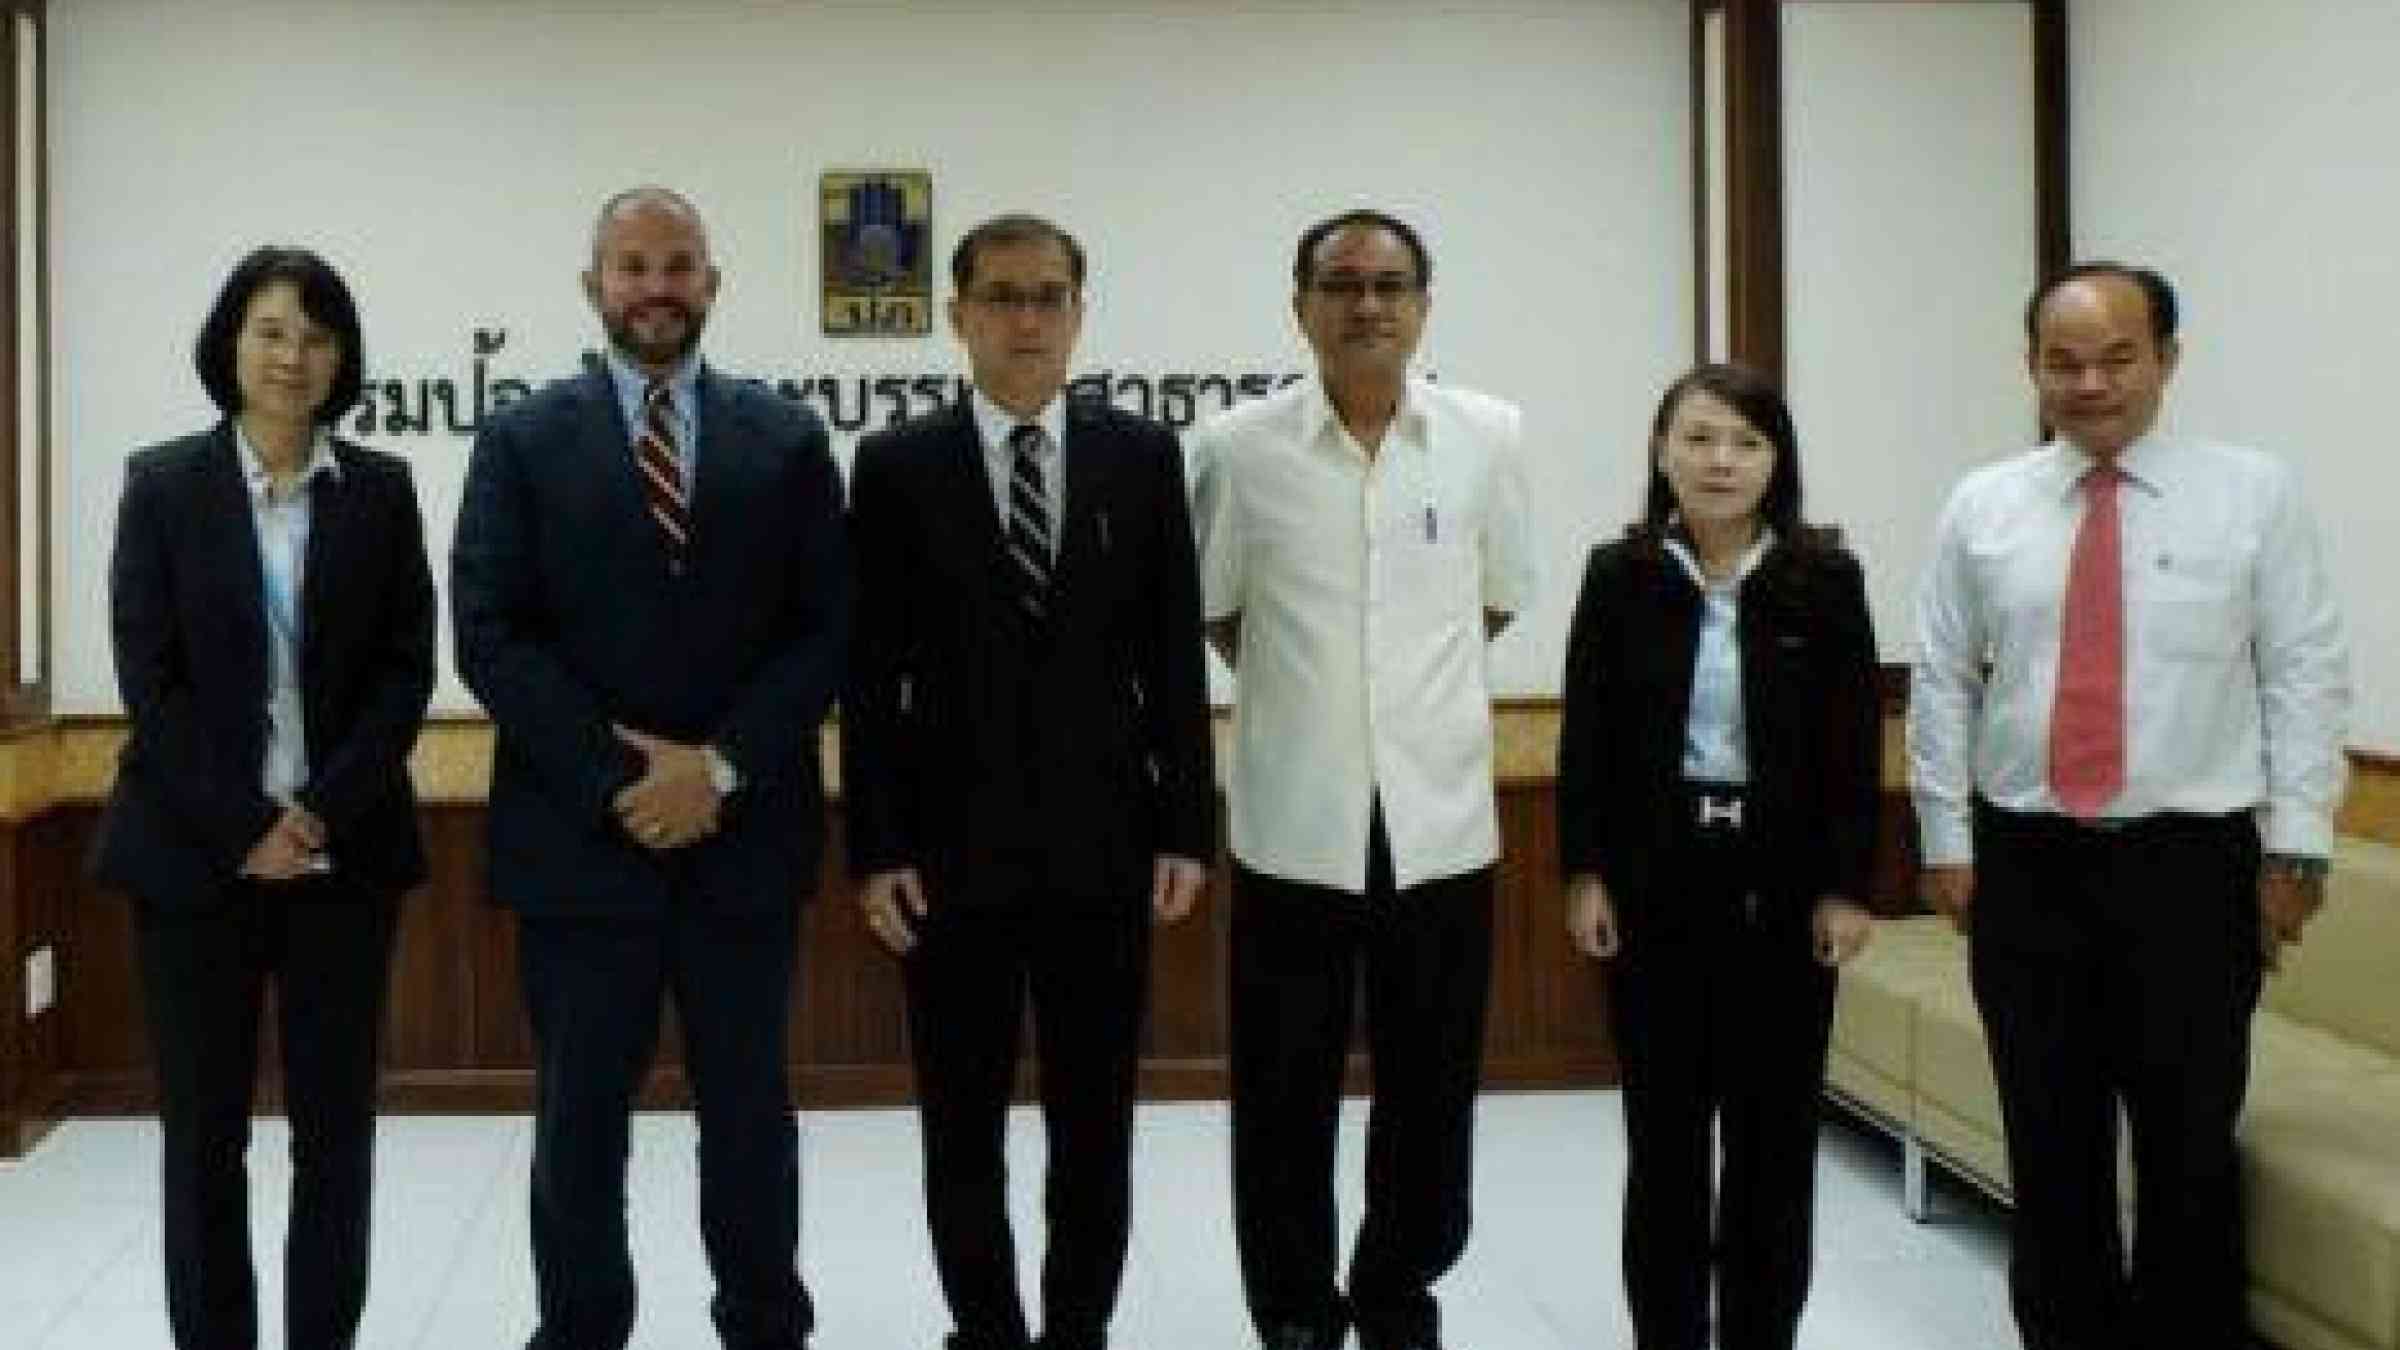 From left to right: UNISDR's Feng Min Kan and Adam Bouloukos with officials from the Thai Disaster Prevention and Mitigation Policy Bureau, Supakit Phopapapan, Deputy Director General,  Kobchai Boonyaorana, Director, Chachadaporn Boonpreeranat, Director of Natural Disaster Policy Section, and  Arun Pinta  of the Research and International Cooperation Bureau (Photo: UNISDR)